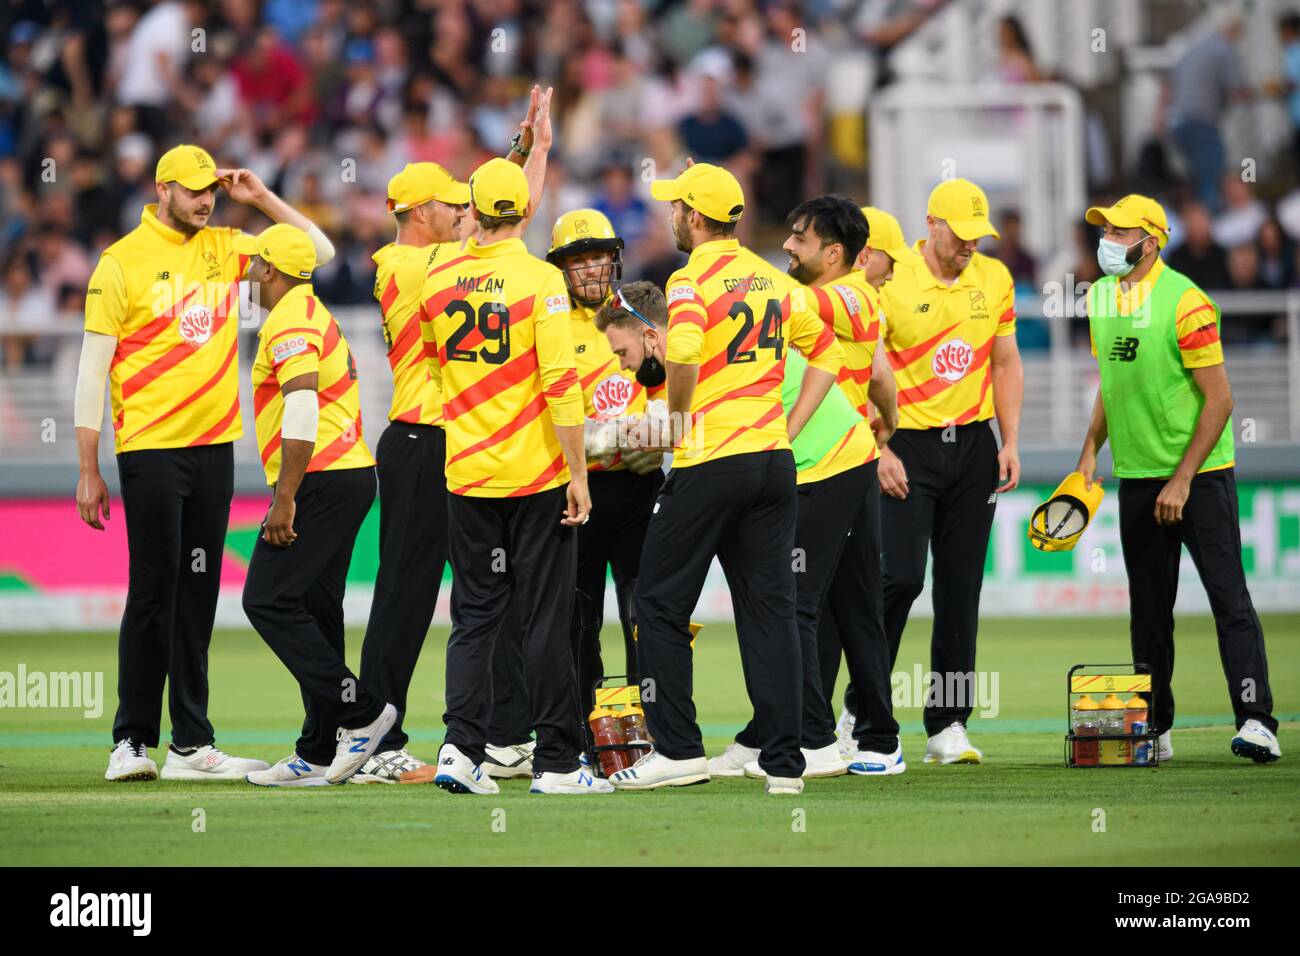 LONDON, UNITED KINGDOM. 29th Jul, 2021.  during The Hundred between London Spirit vs Trent Rockets at Lord's on Thursday, July 29, 2021 in LONDON ENGLAND.  Credit: Taka G Wu/Alamy Live News Stock Photo